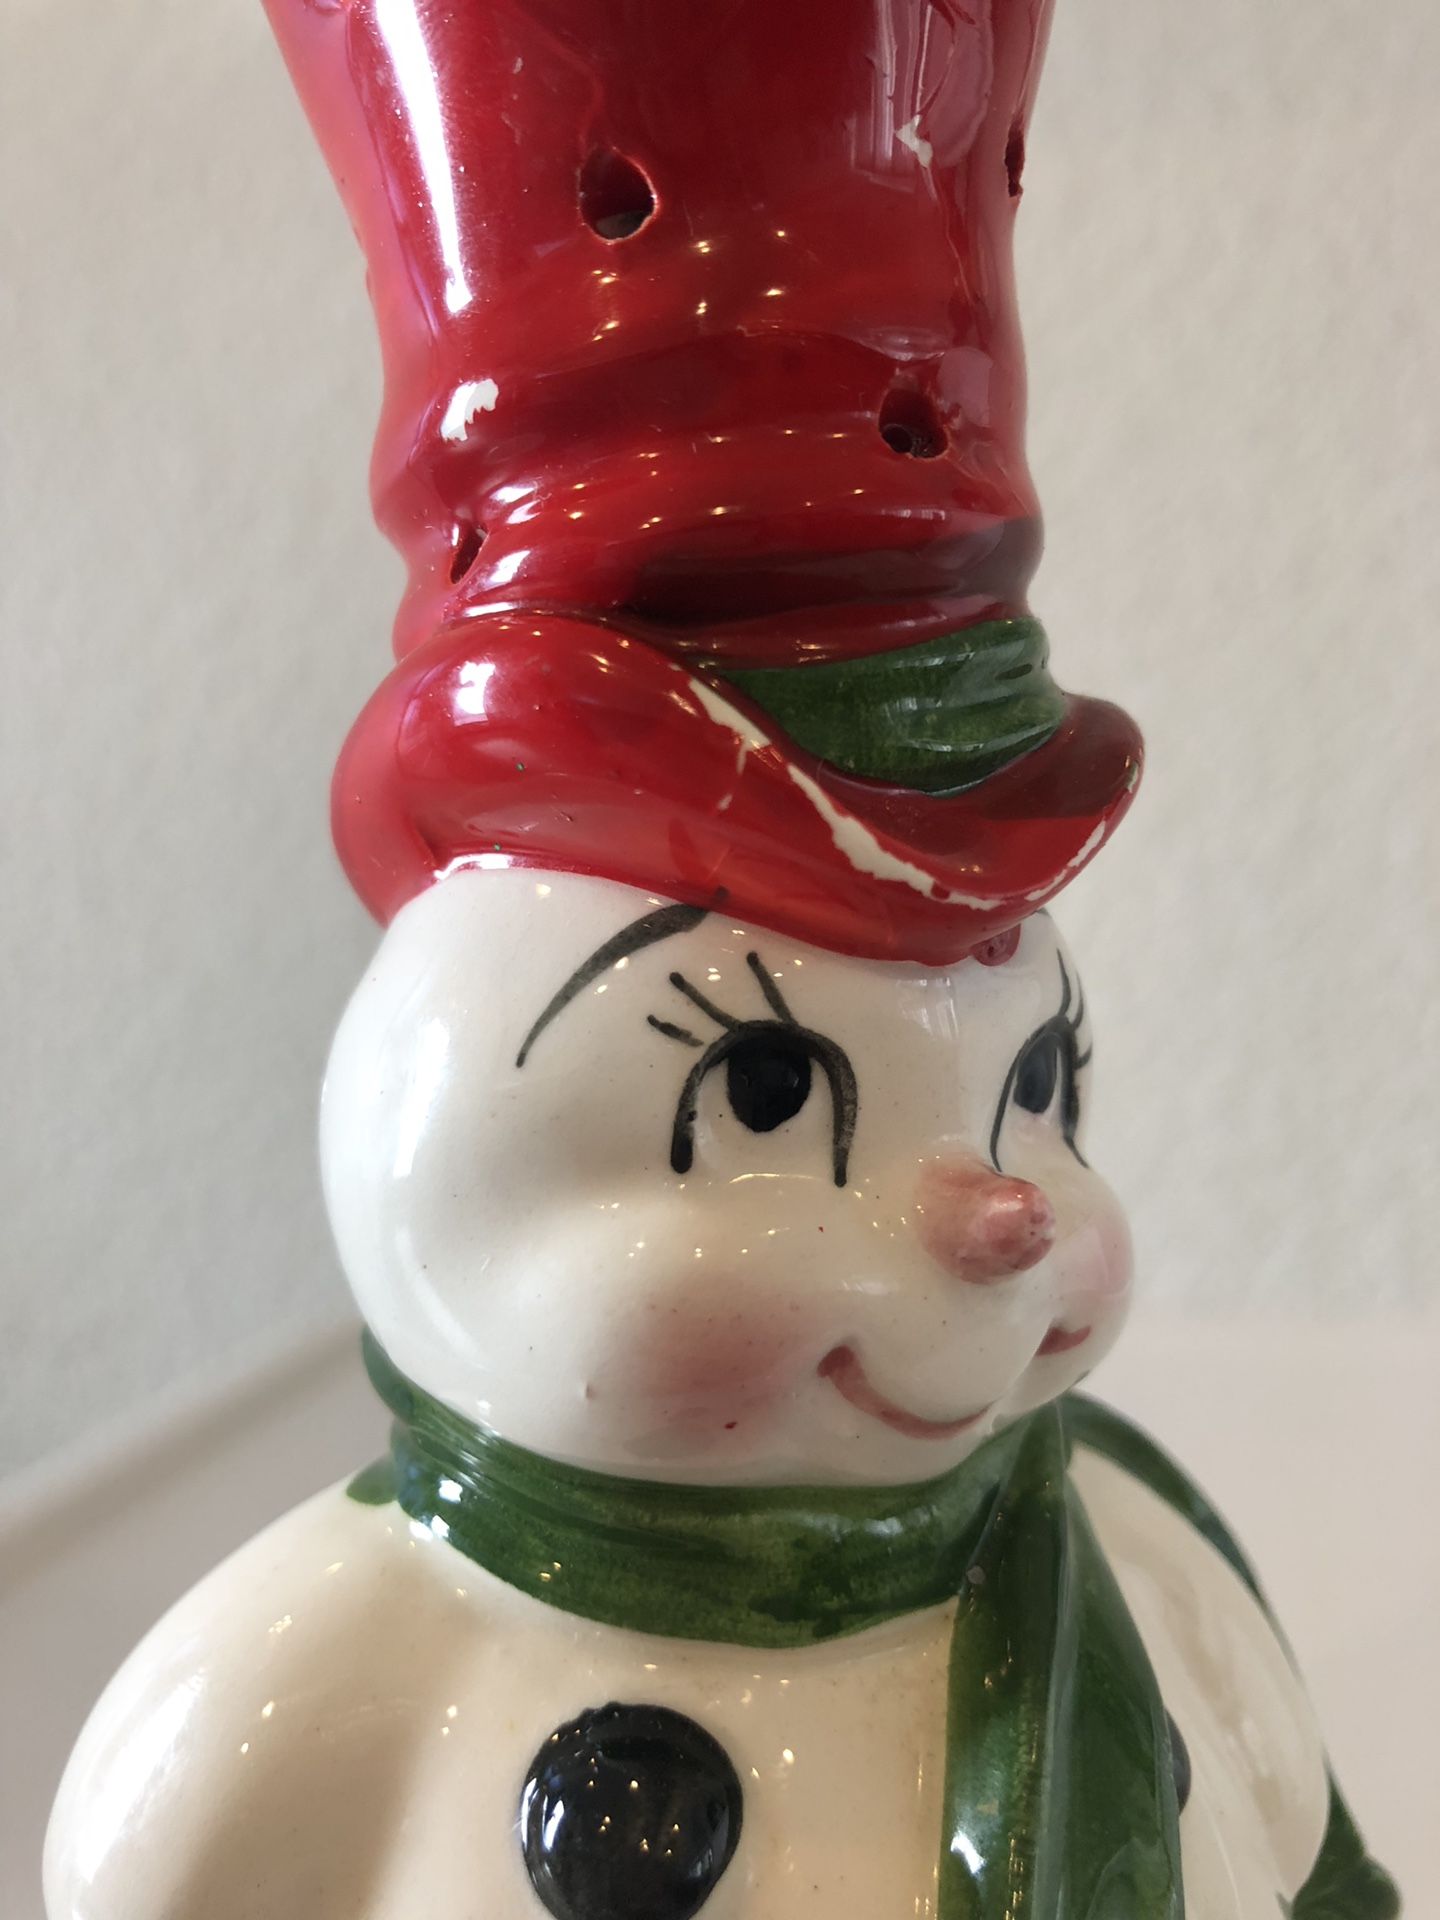 Vintage Lefton Snowman Hors d'Oeuvre or Appetizer Holder - Mid-Century 1950s Snowman in Tall Top Hat Kitschmas, Kitschy Christmas Decor